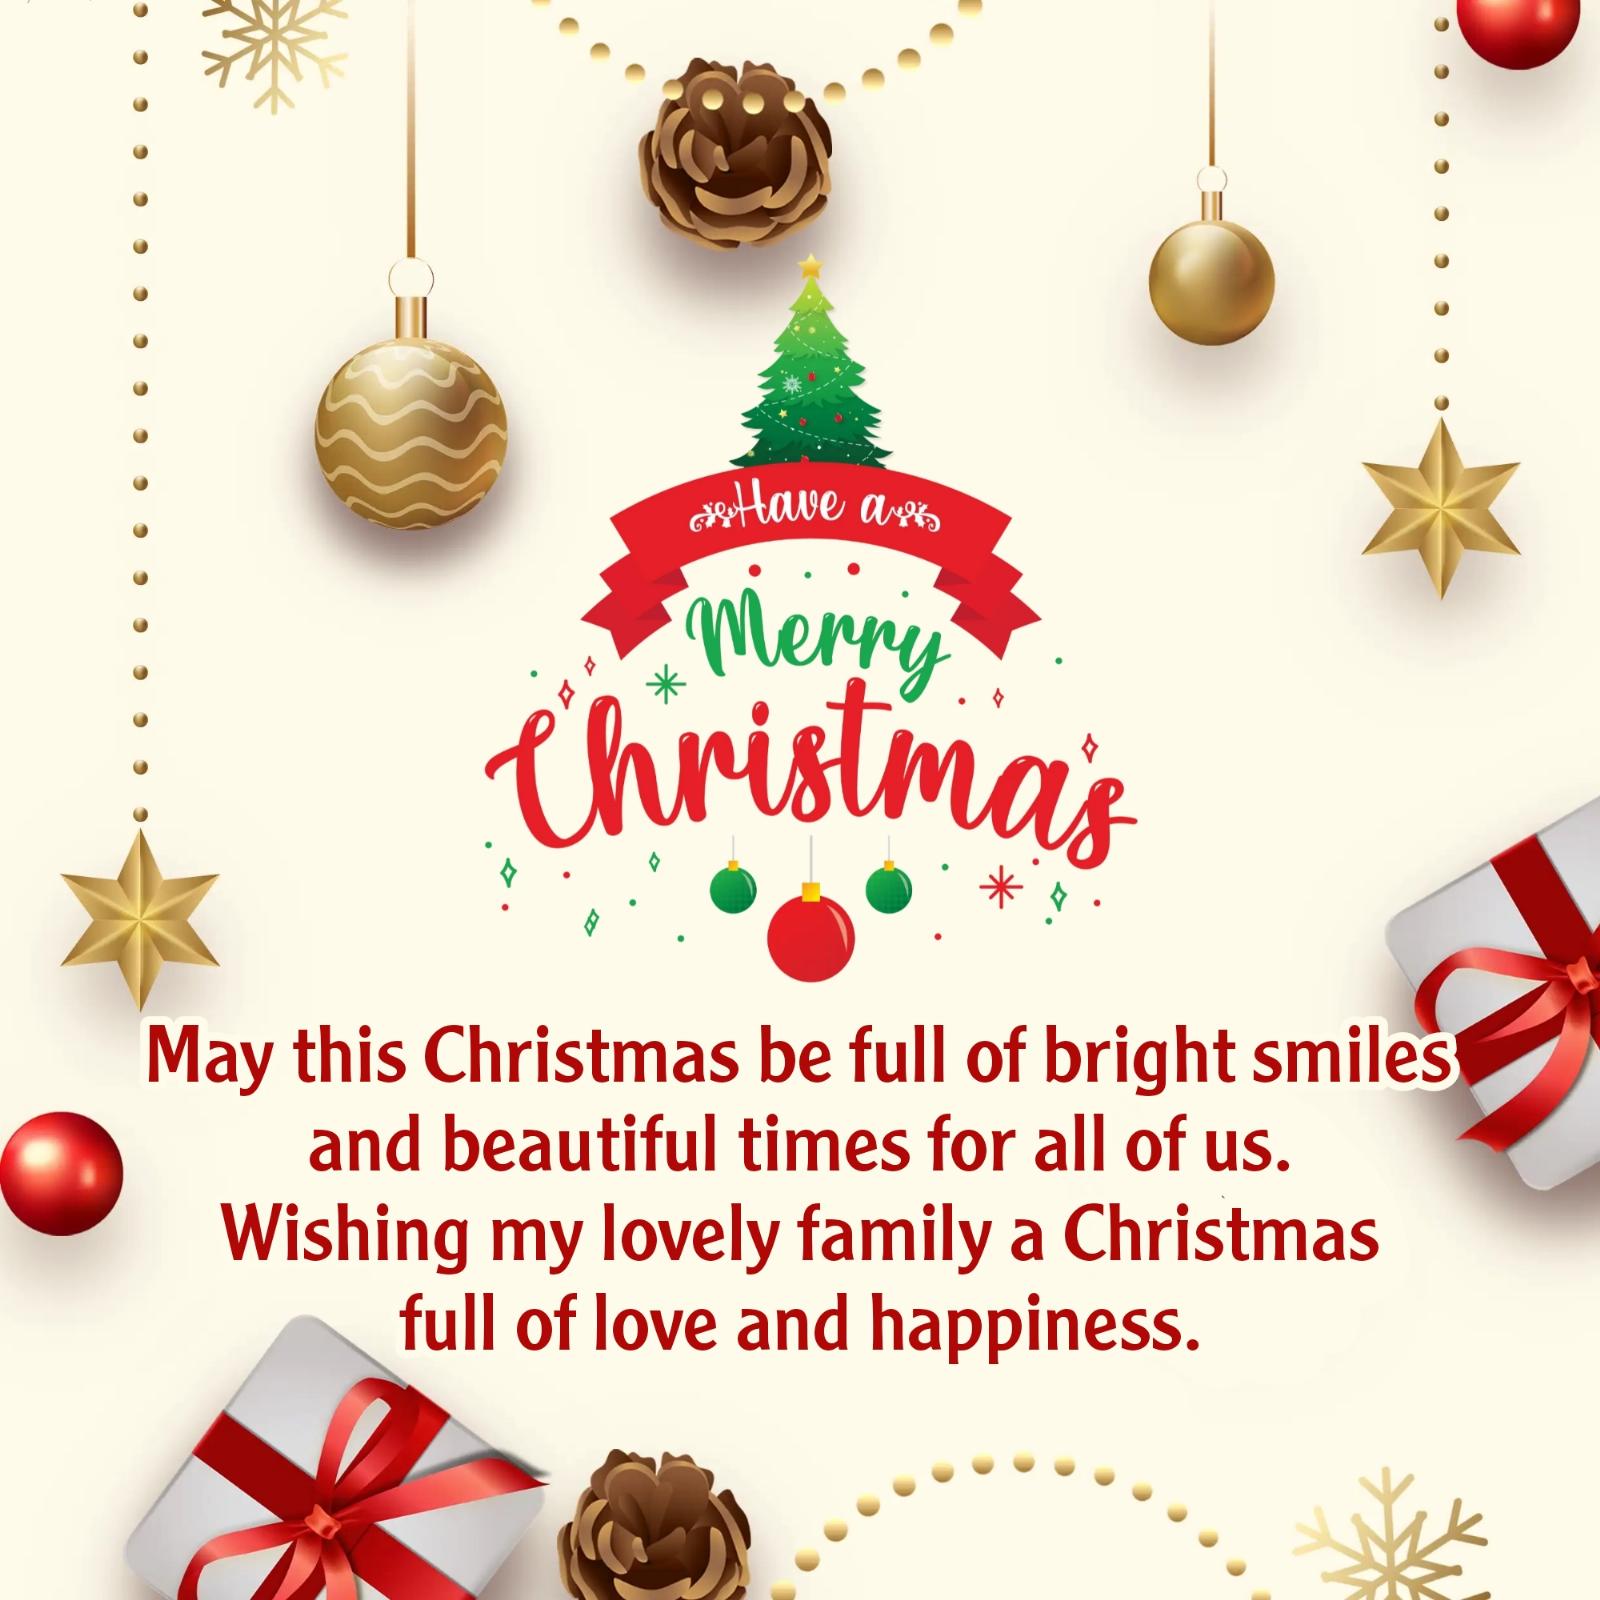 May this Christmas be full of bright smiles and beautiful times